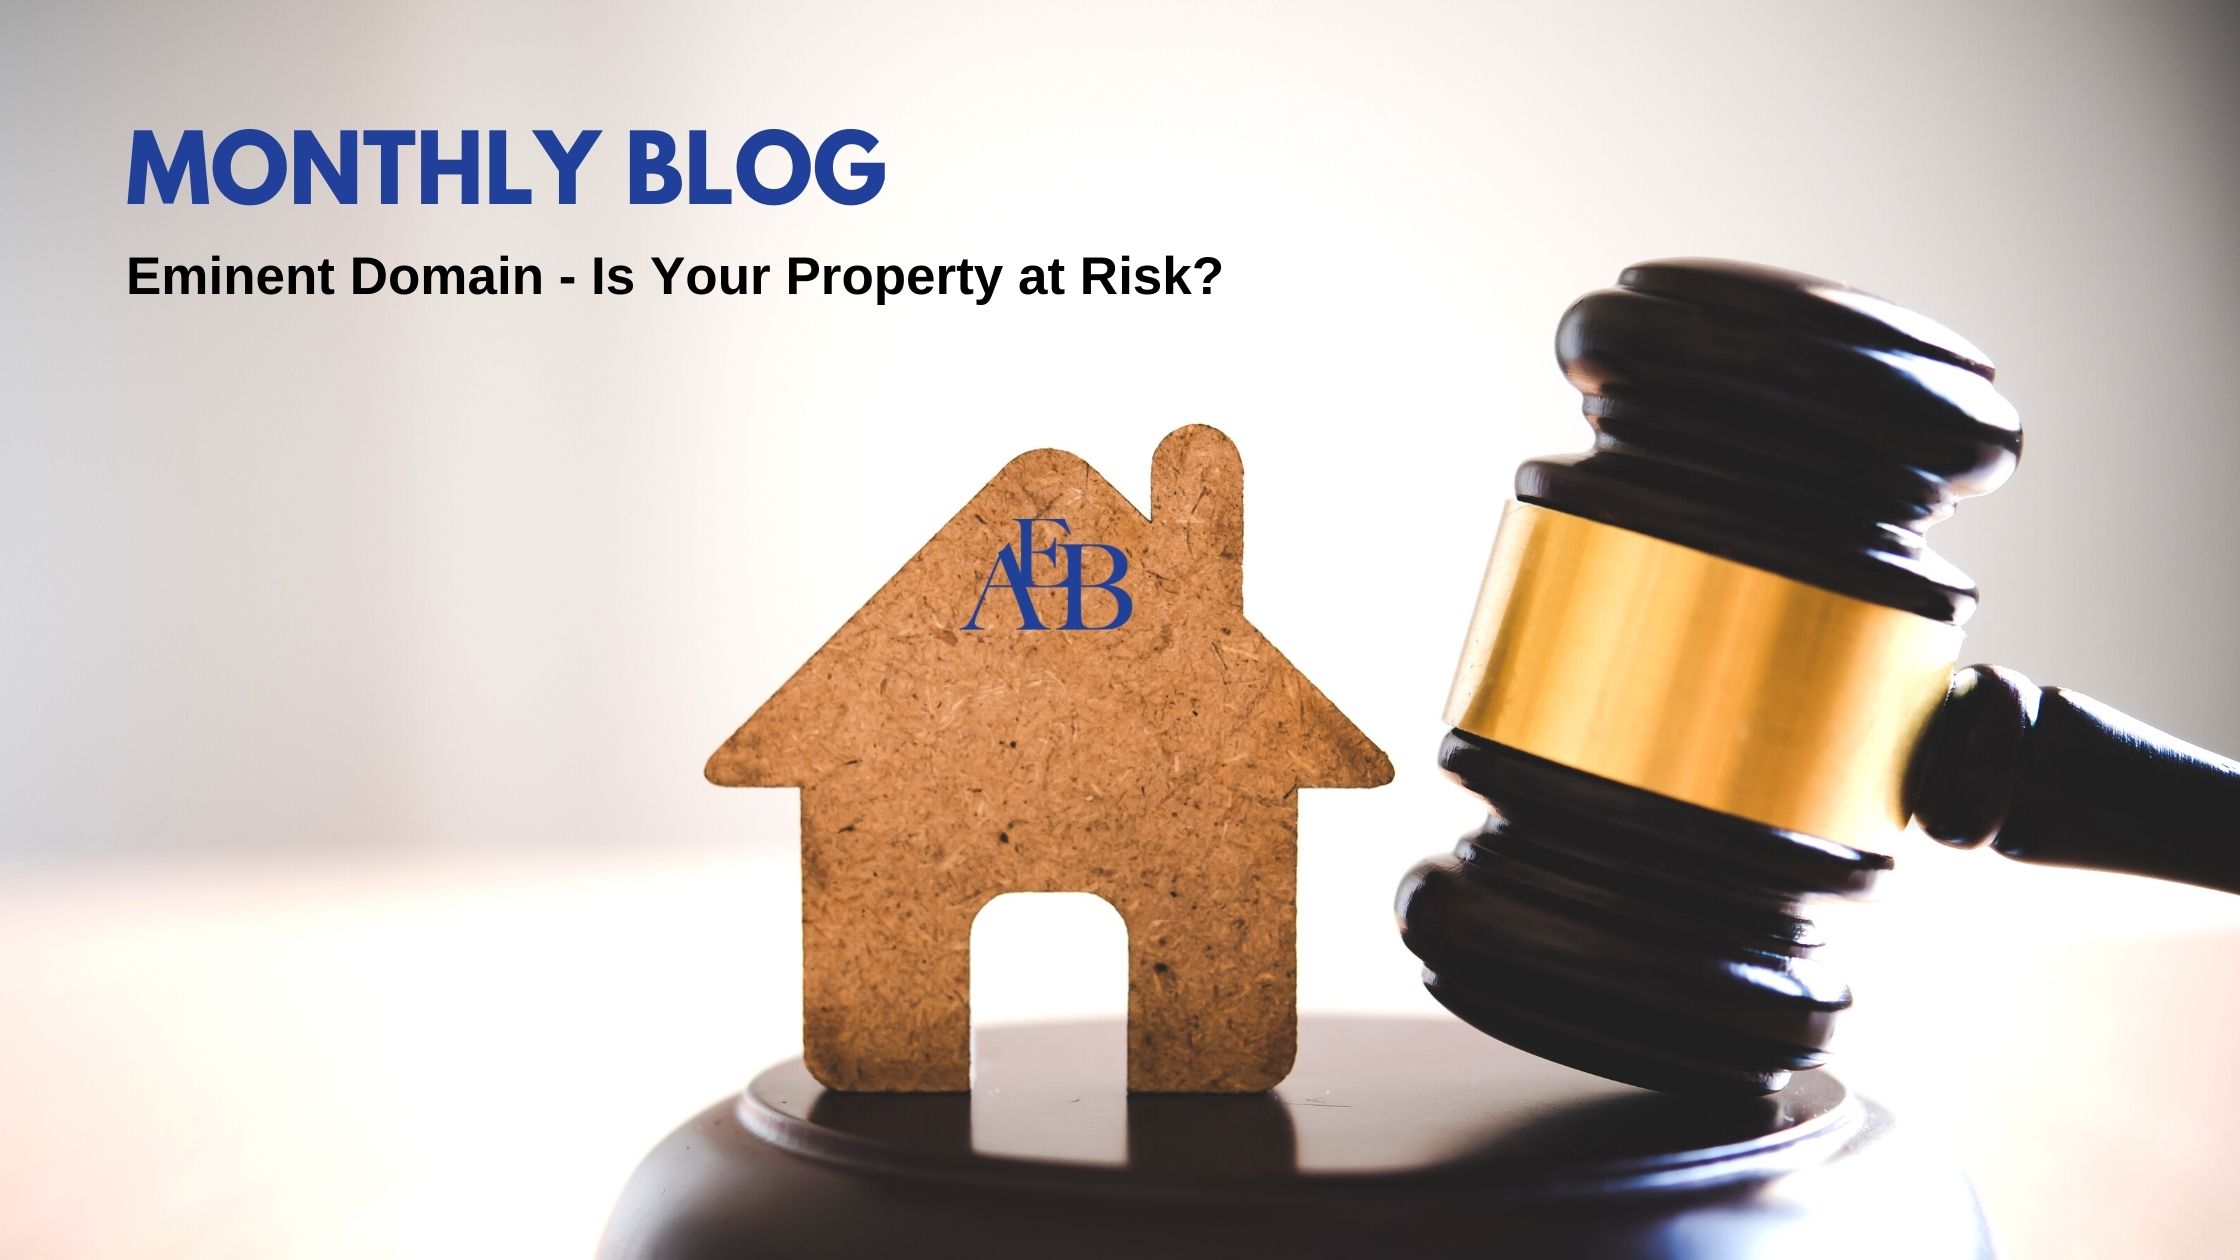 Eminent Domain - Is your property at risk?